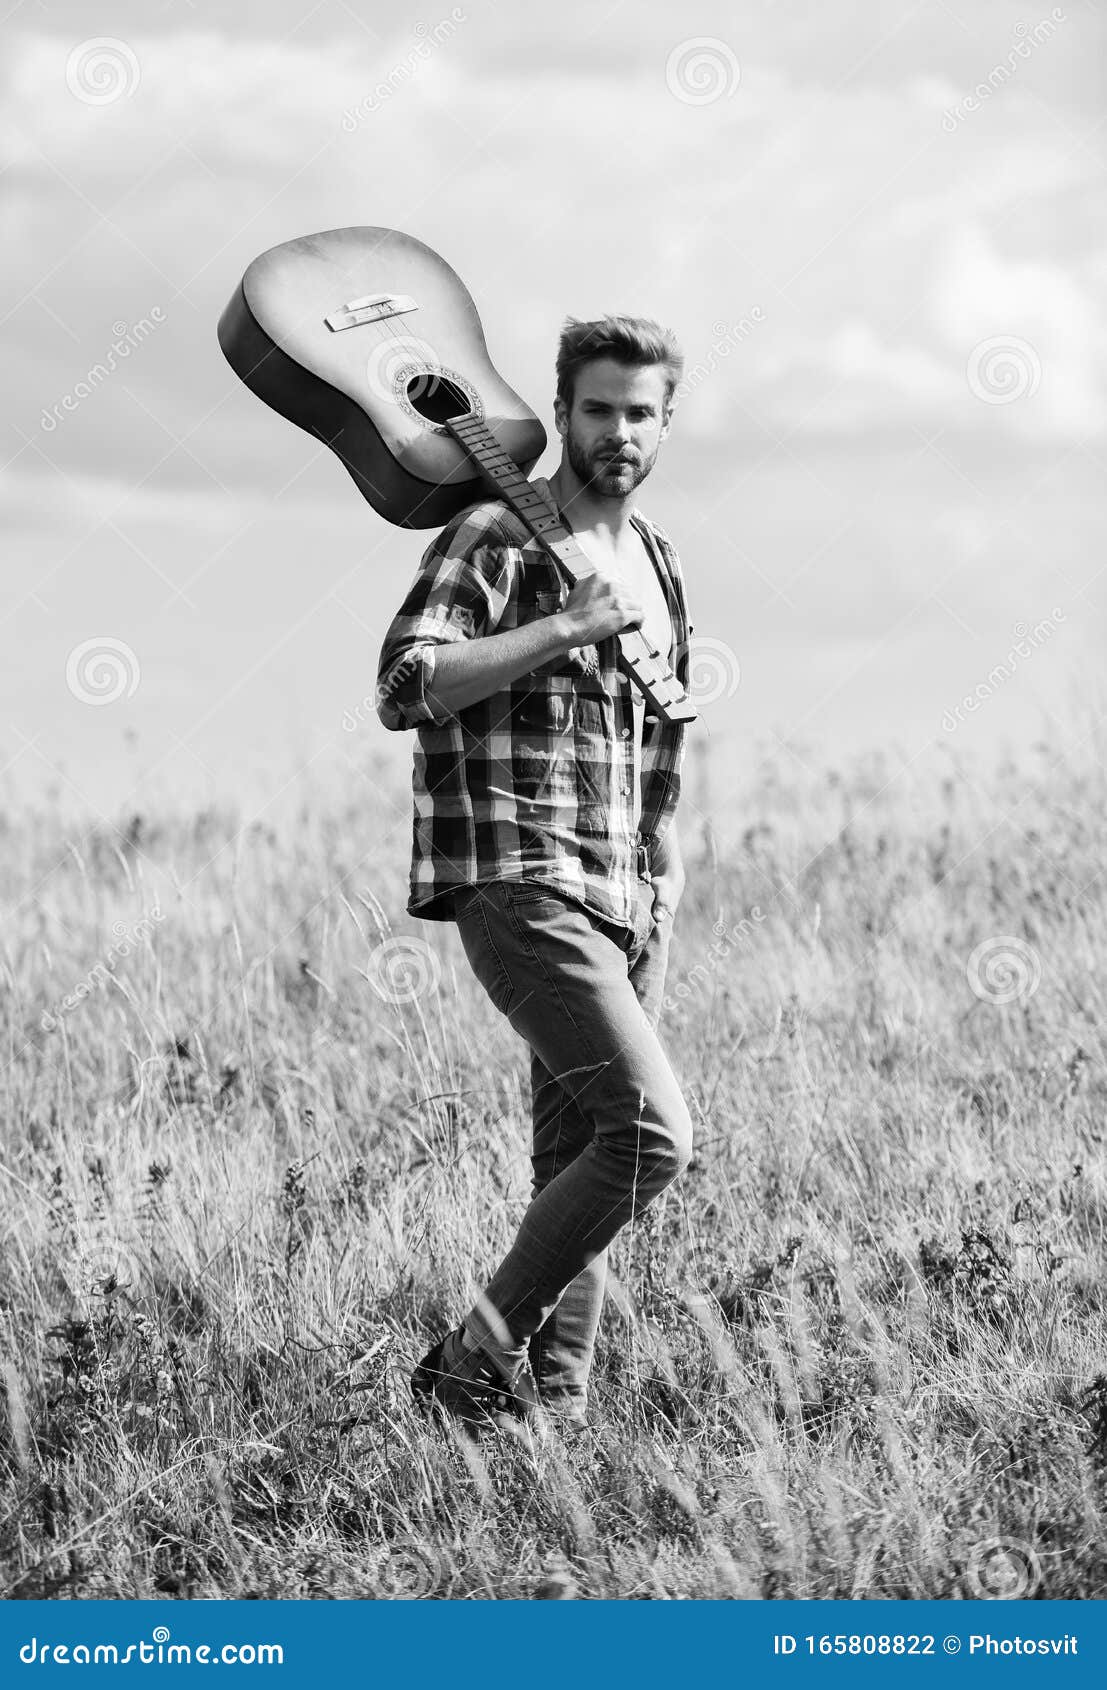 musician looking for inspiration. wanderlust concept. inspiring nature. guy with guitar contemplate nature. in search of